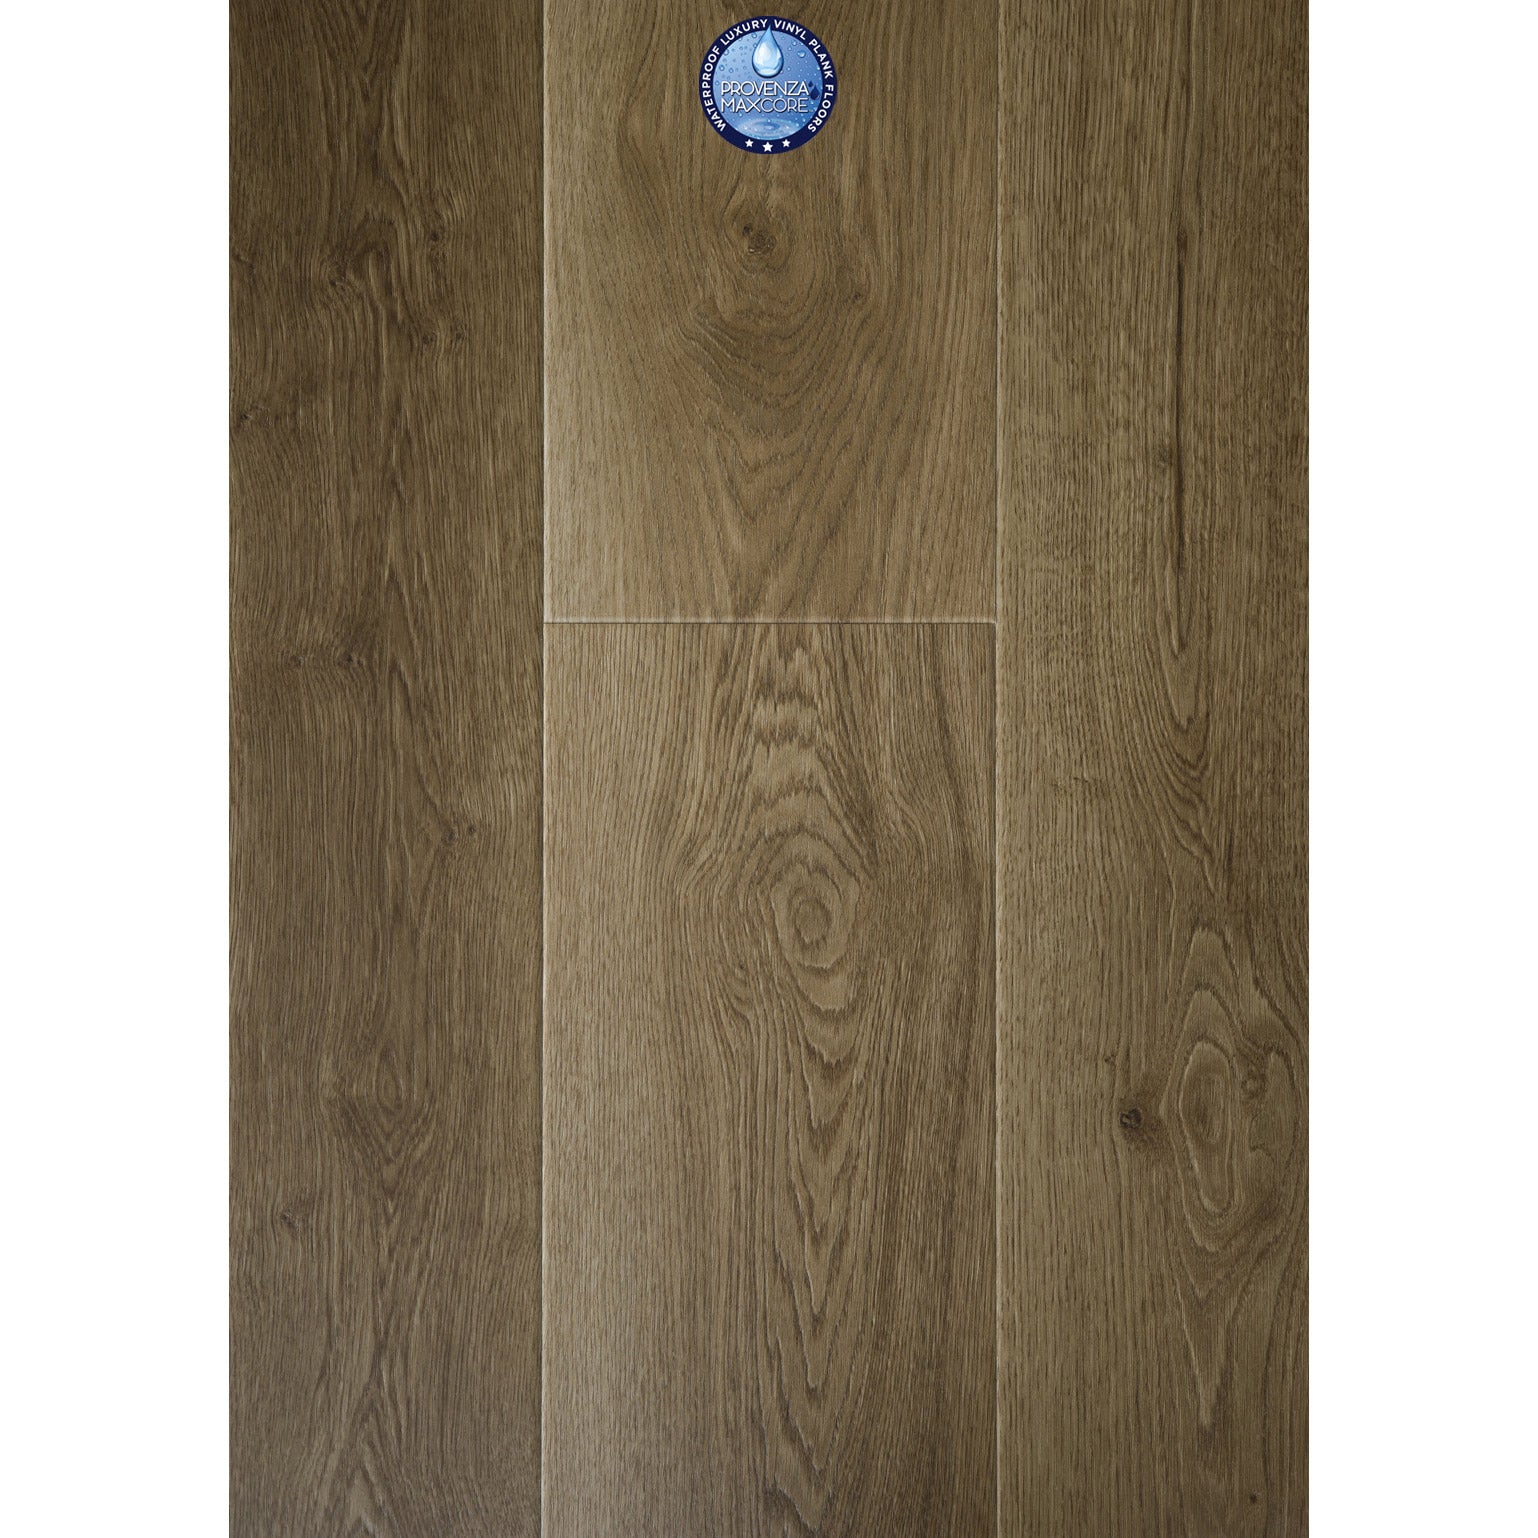 Provenza Floors - New Wave - 8.75 in. x 72 in. Rigid Core - Timber Wolf